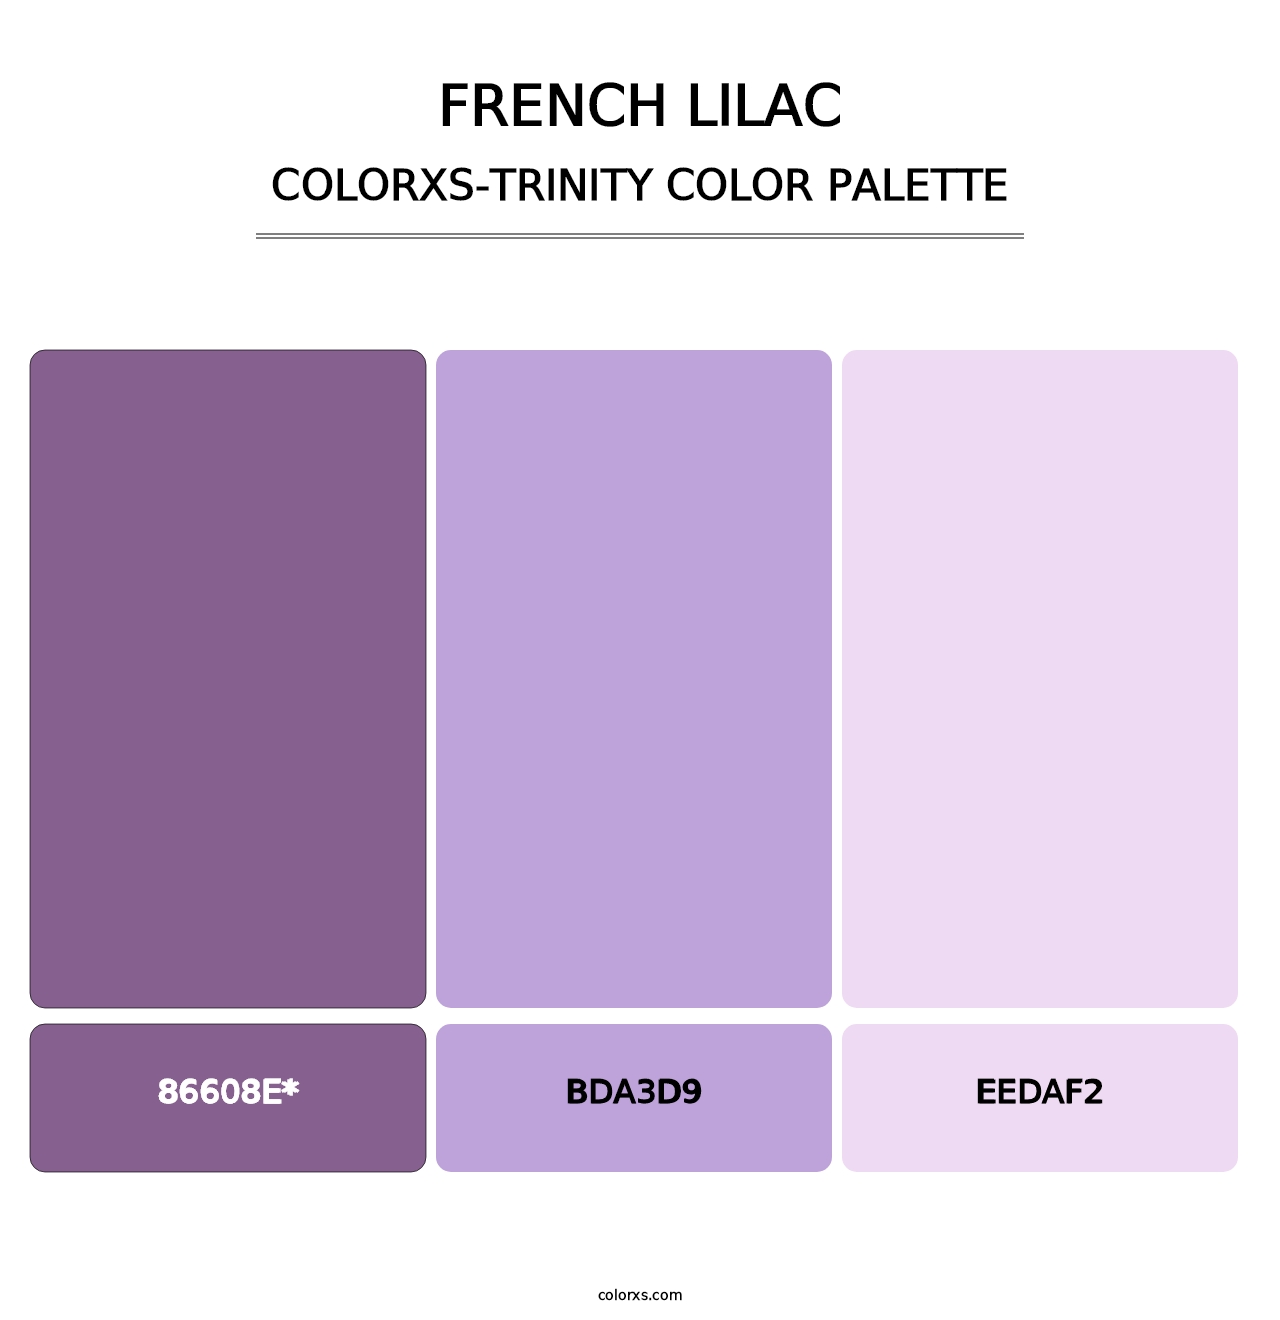 French Lilac - Colorxs Trinity Palette